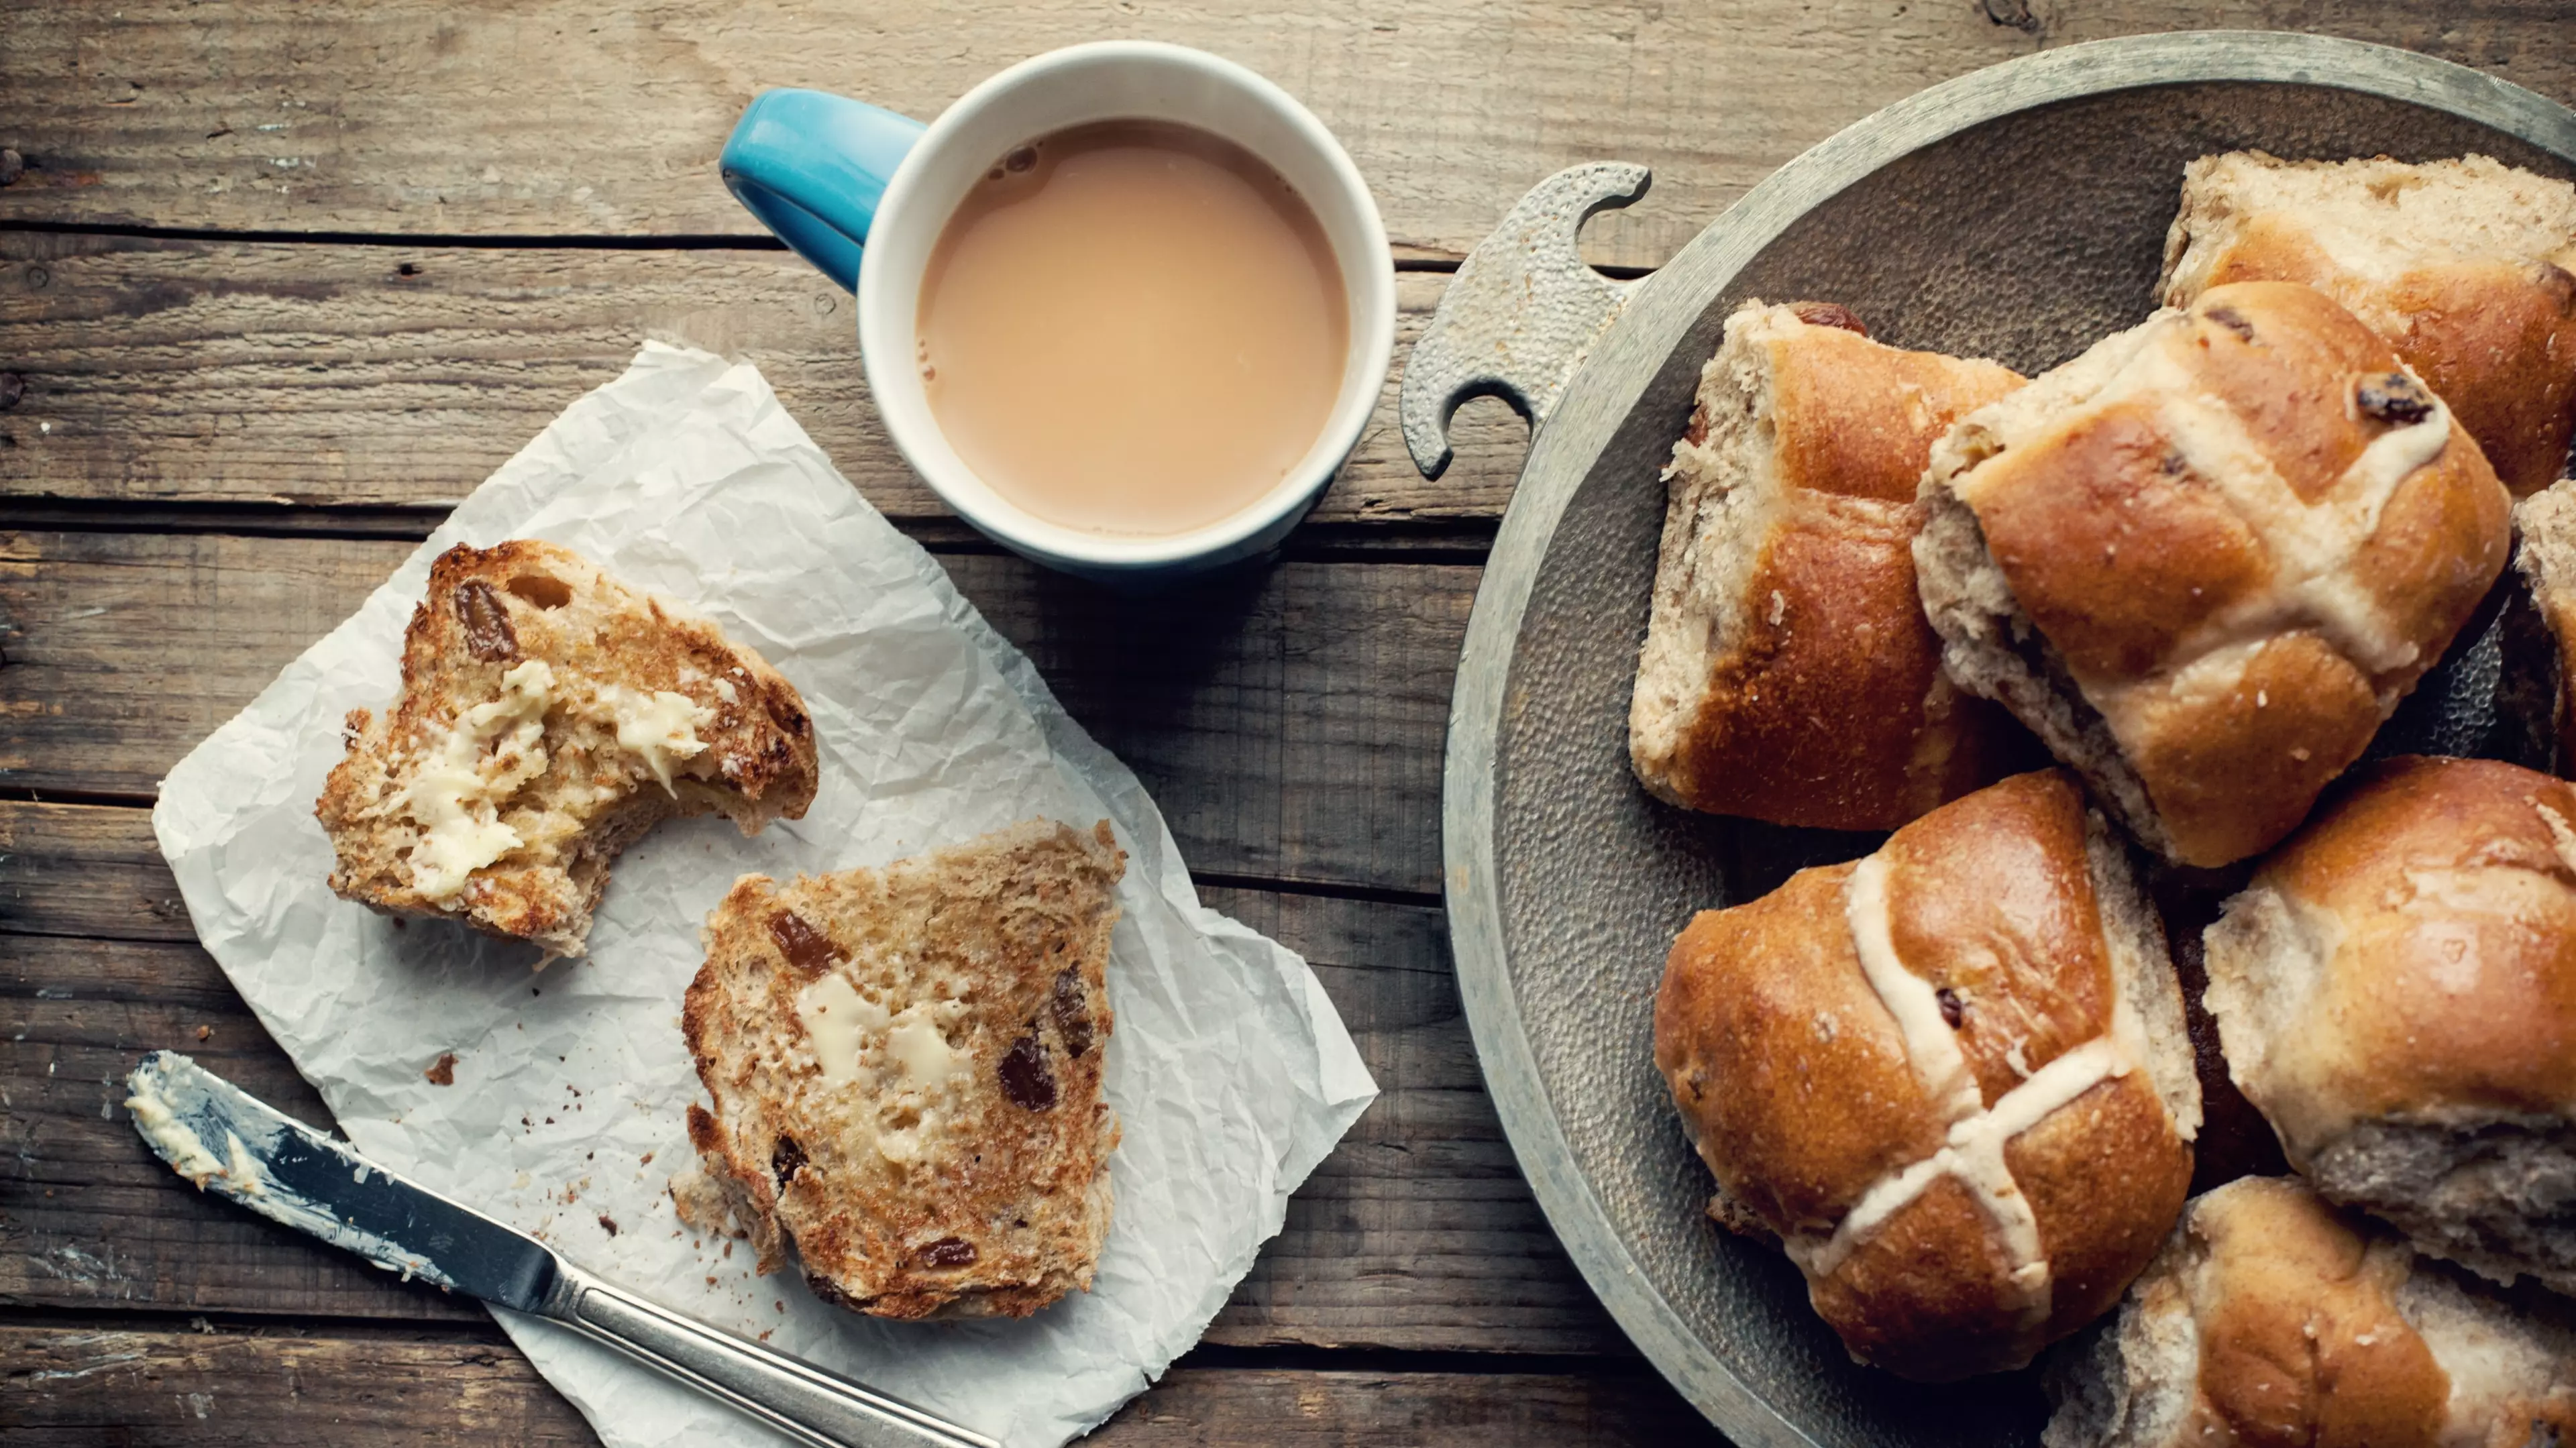 Asda Is Selling Delicious Chocolate Chip Hot Cross Buns For Easter